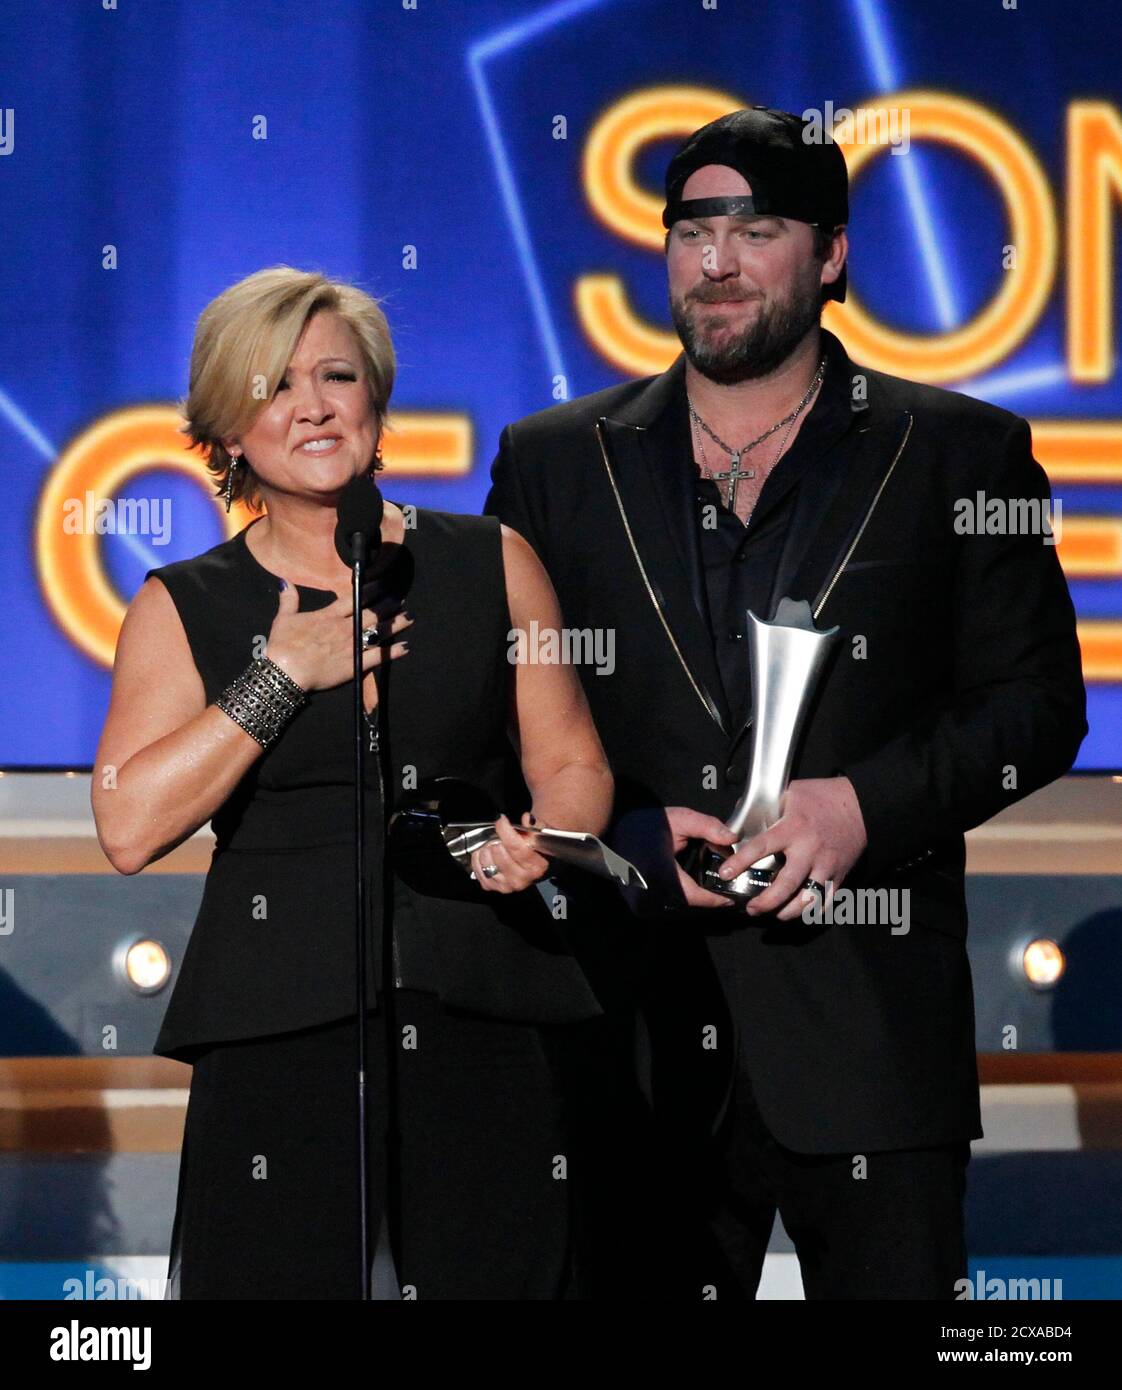 Country singer Lee Brice (R) and songwriter Connie Harrington accept the  award for song of the year for 